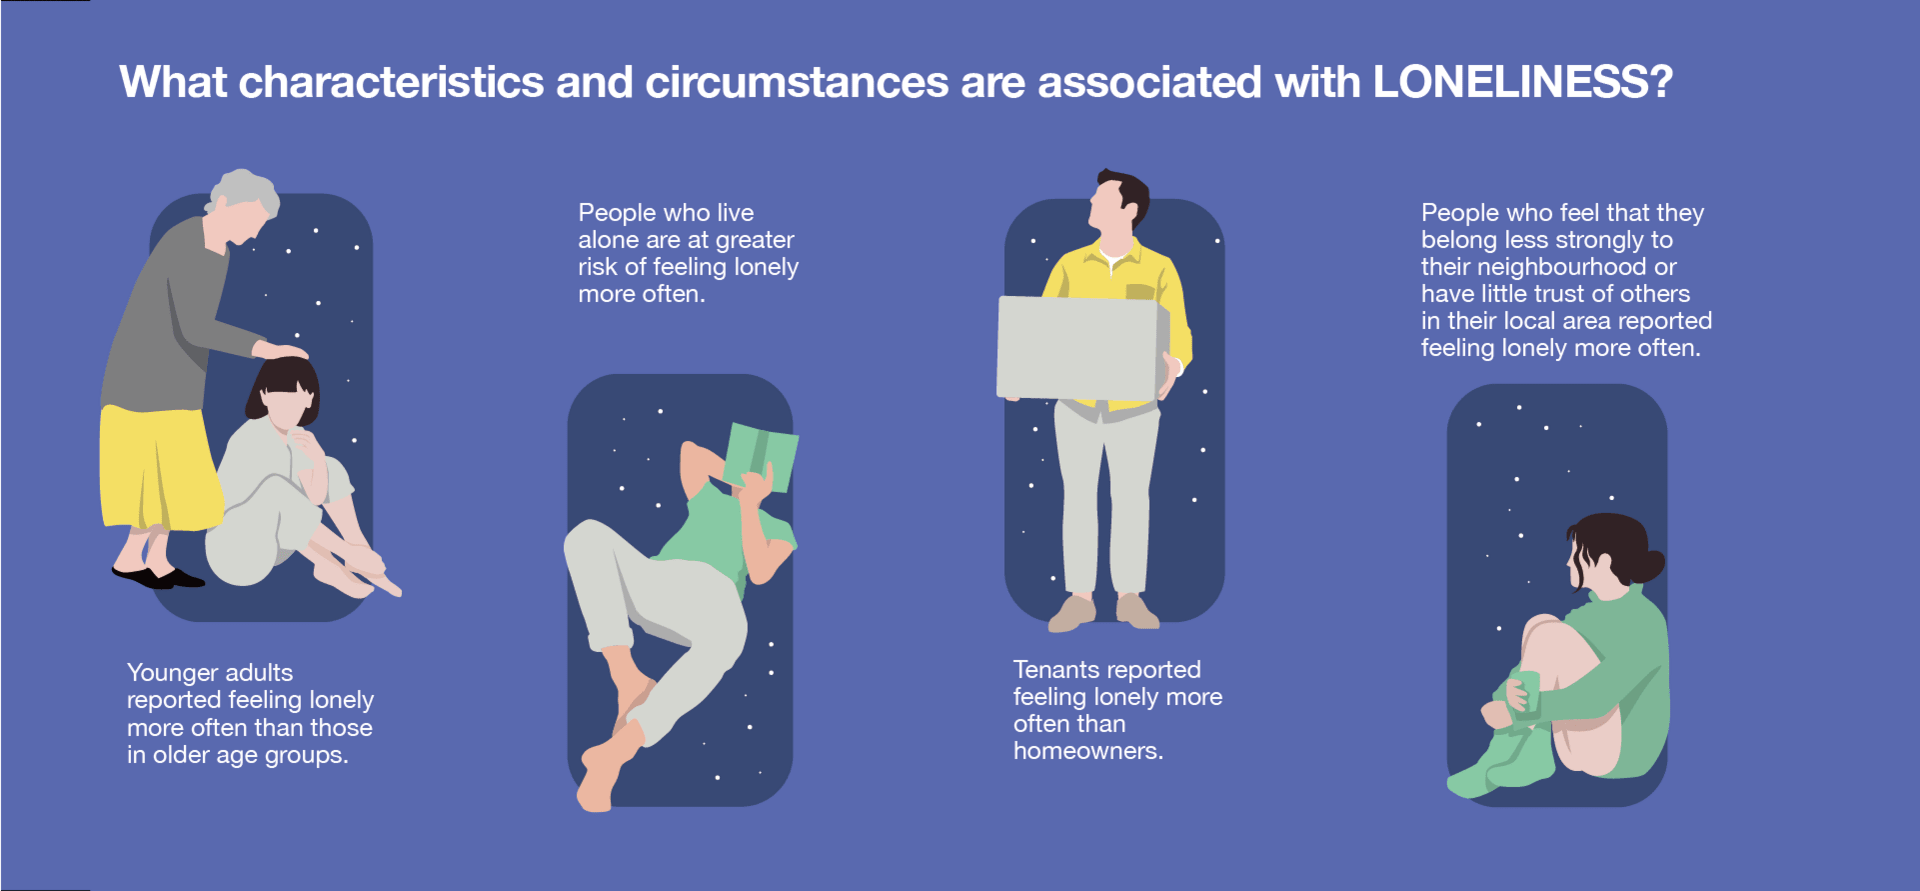 What characteristics and circumstances are associated with LONELINESS?